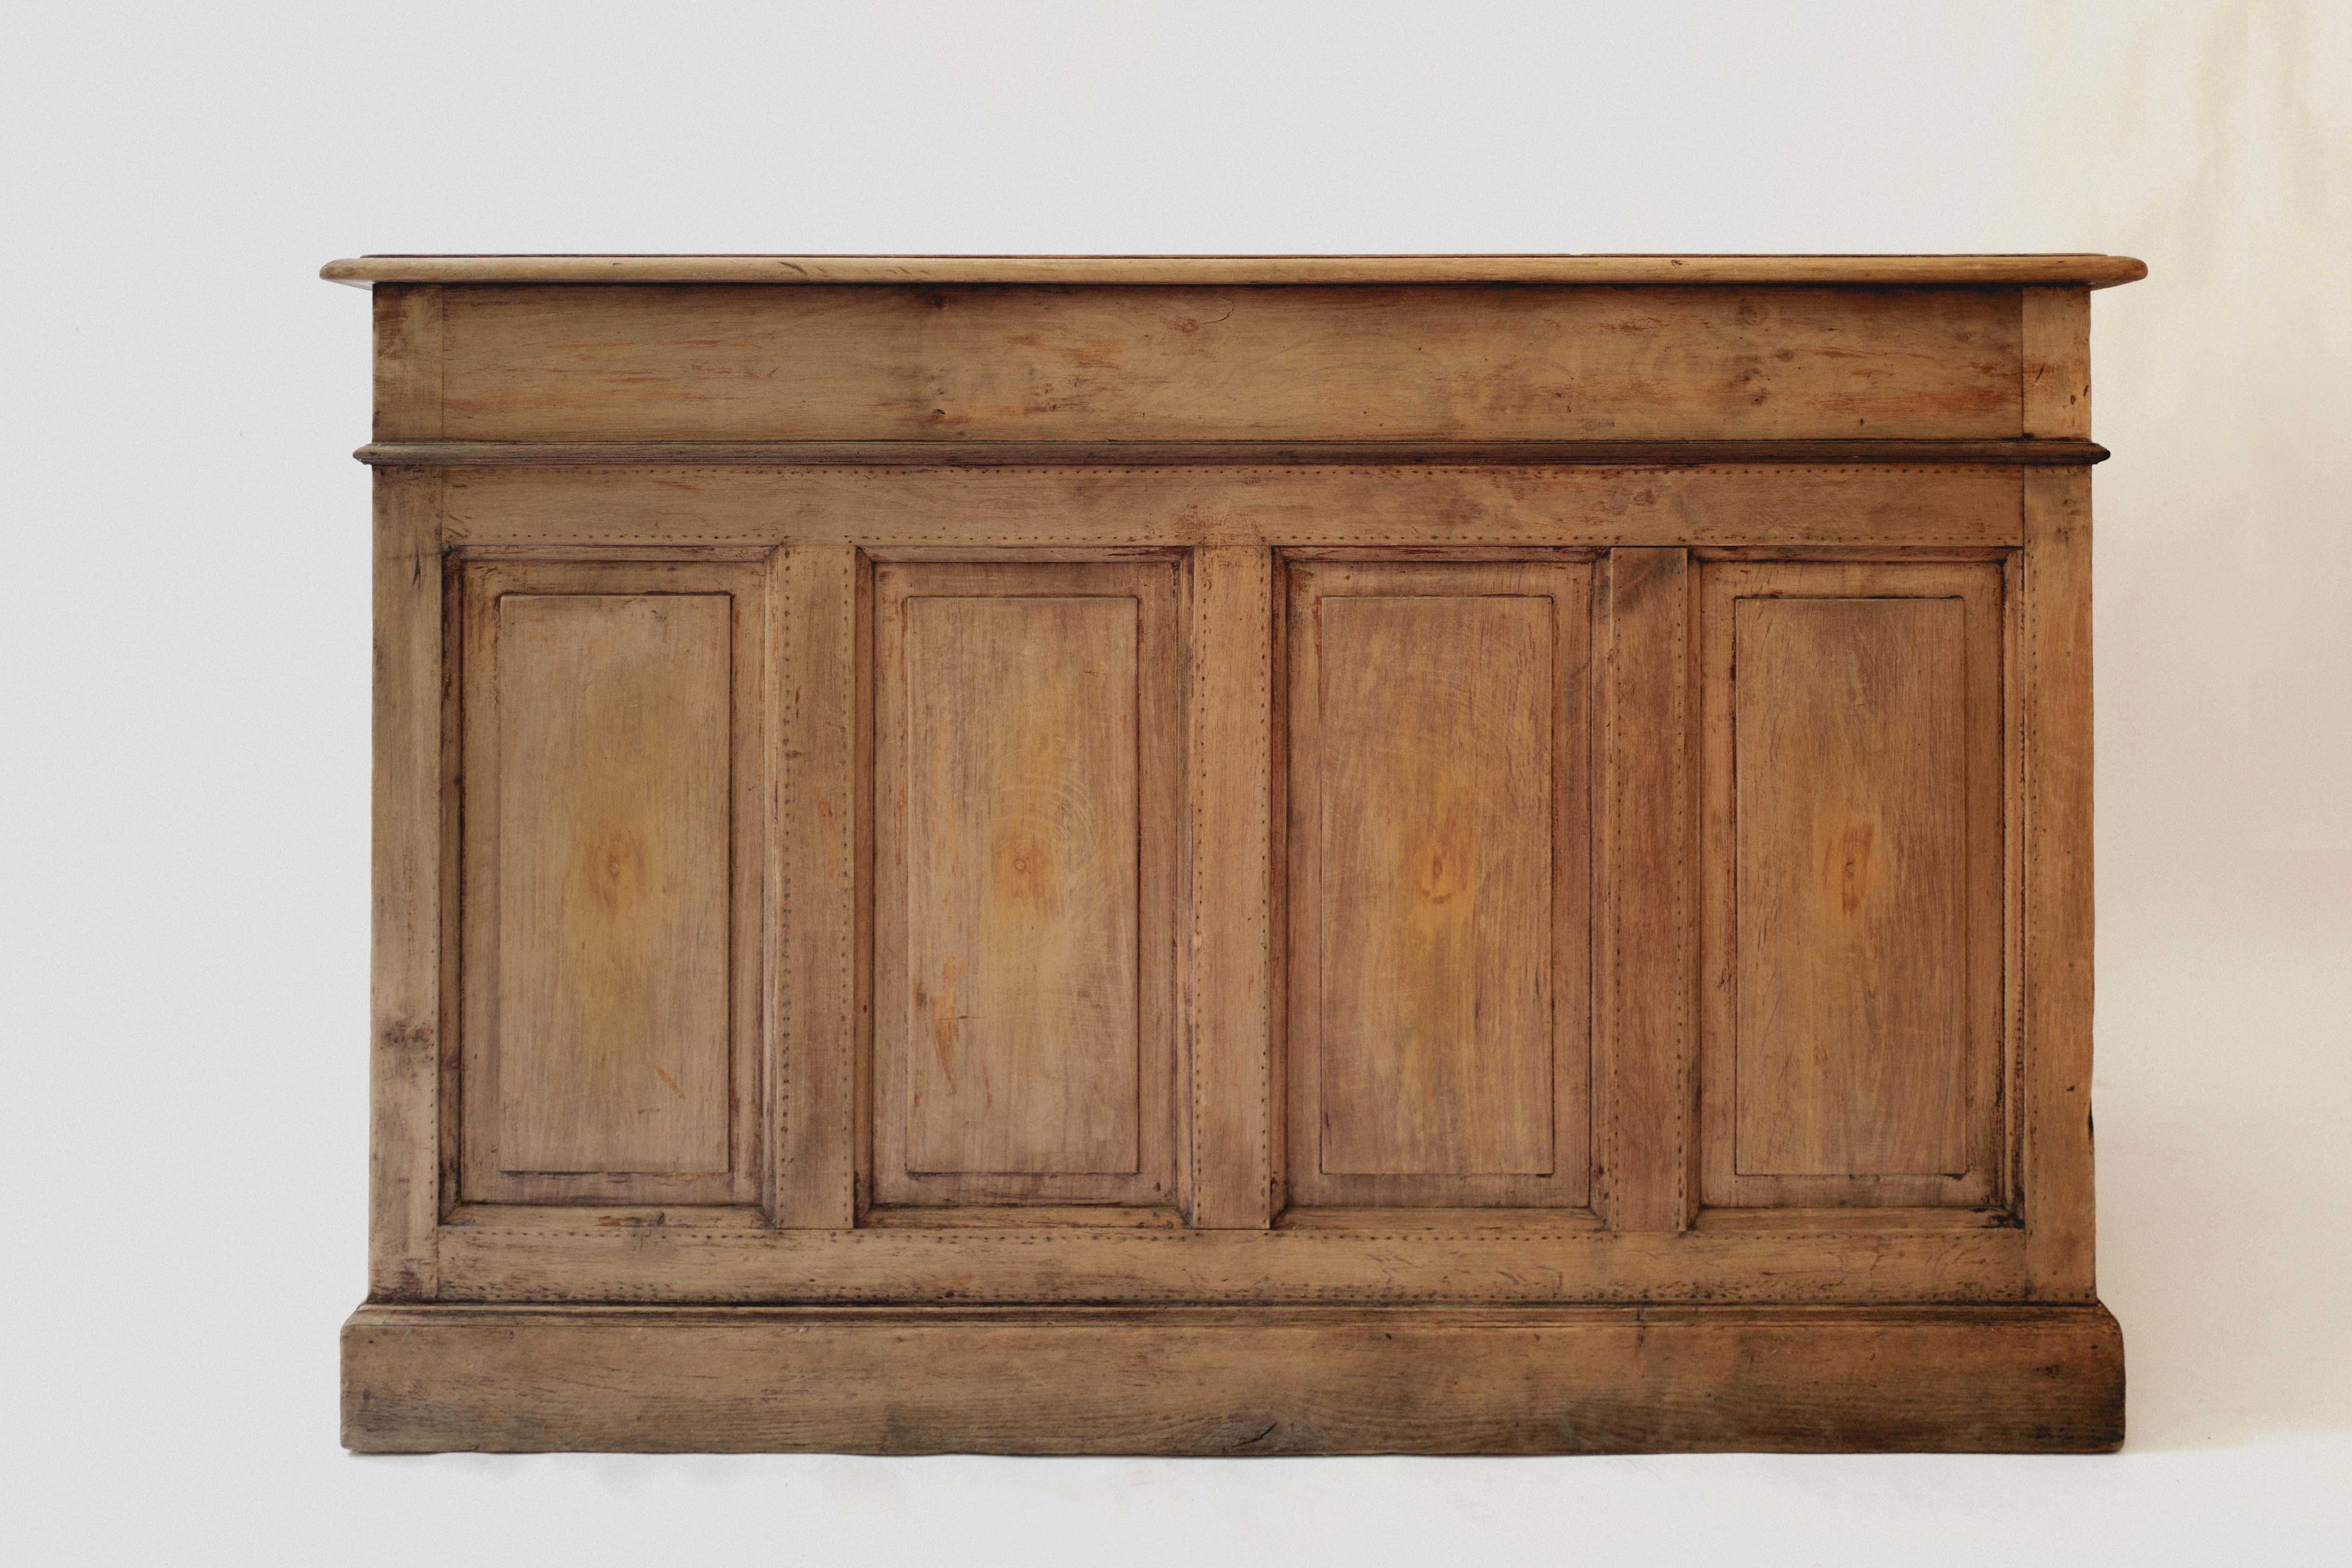 This is a 19th century oak counter from Pichon in Lyon, France. Fantastic condition. It would work beautifully in a hospitality space rather it be a chic hotel check in counter, restaurant check in counter, or retail check out counter. It has two